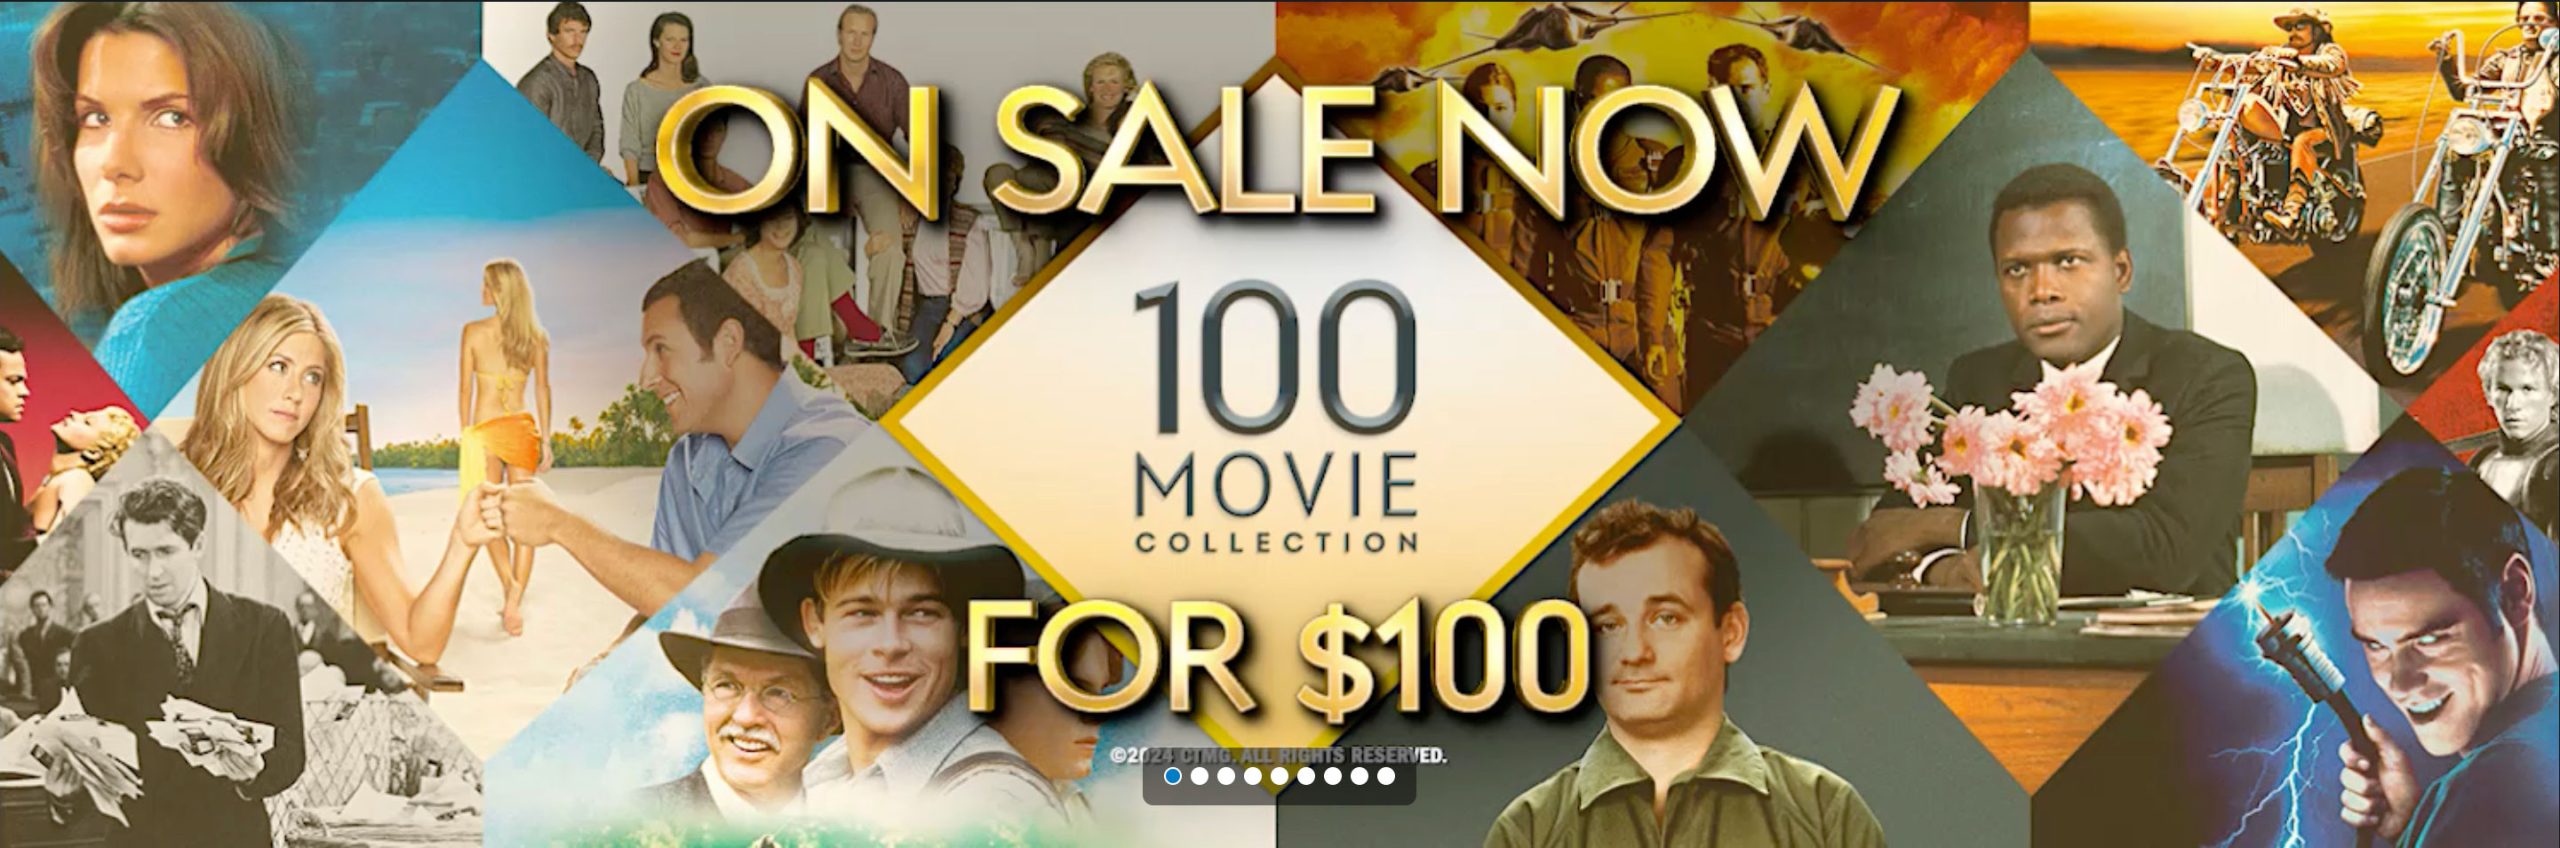 Columbia Pictures' 100th Anniversary Celebrated With 100 Movies For $100